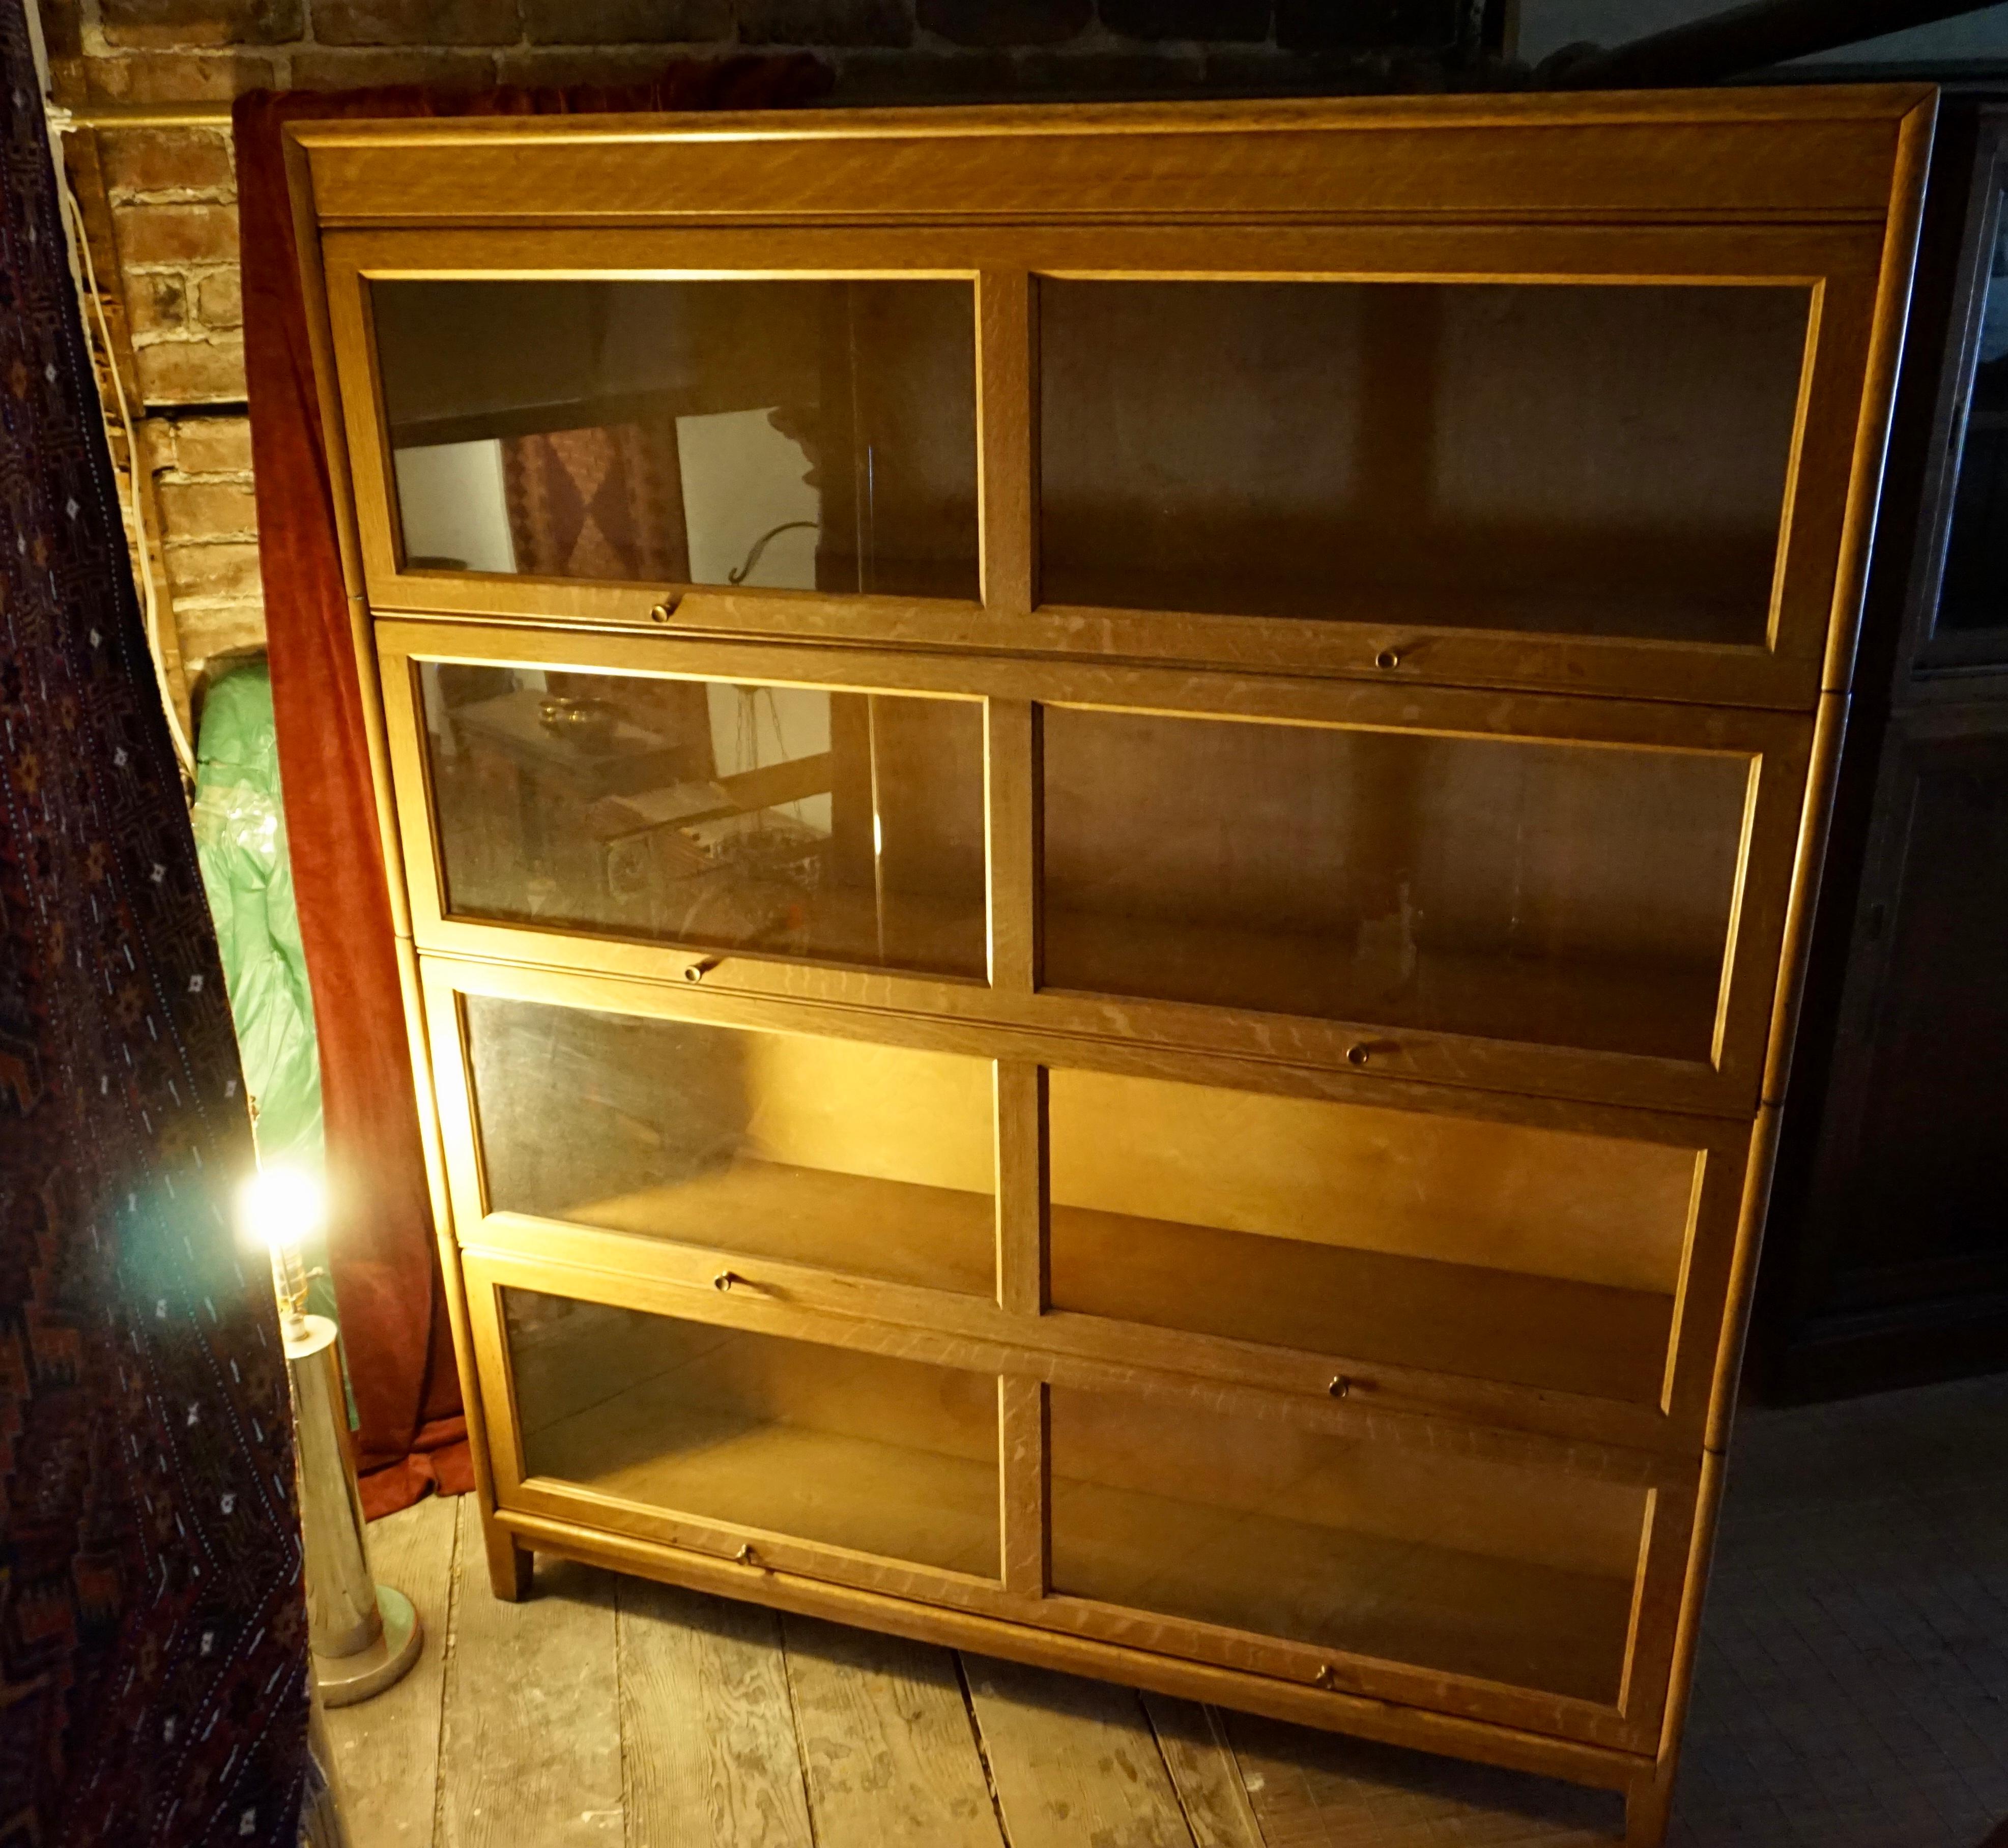 Well constructed blonde oak barrister in good condition with brass knobs and sound mechanism. Dismantles easily on raised base, nice size. Shows beautifully...

circa 1950s.